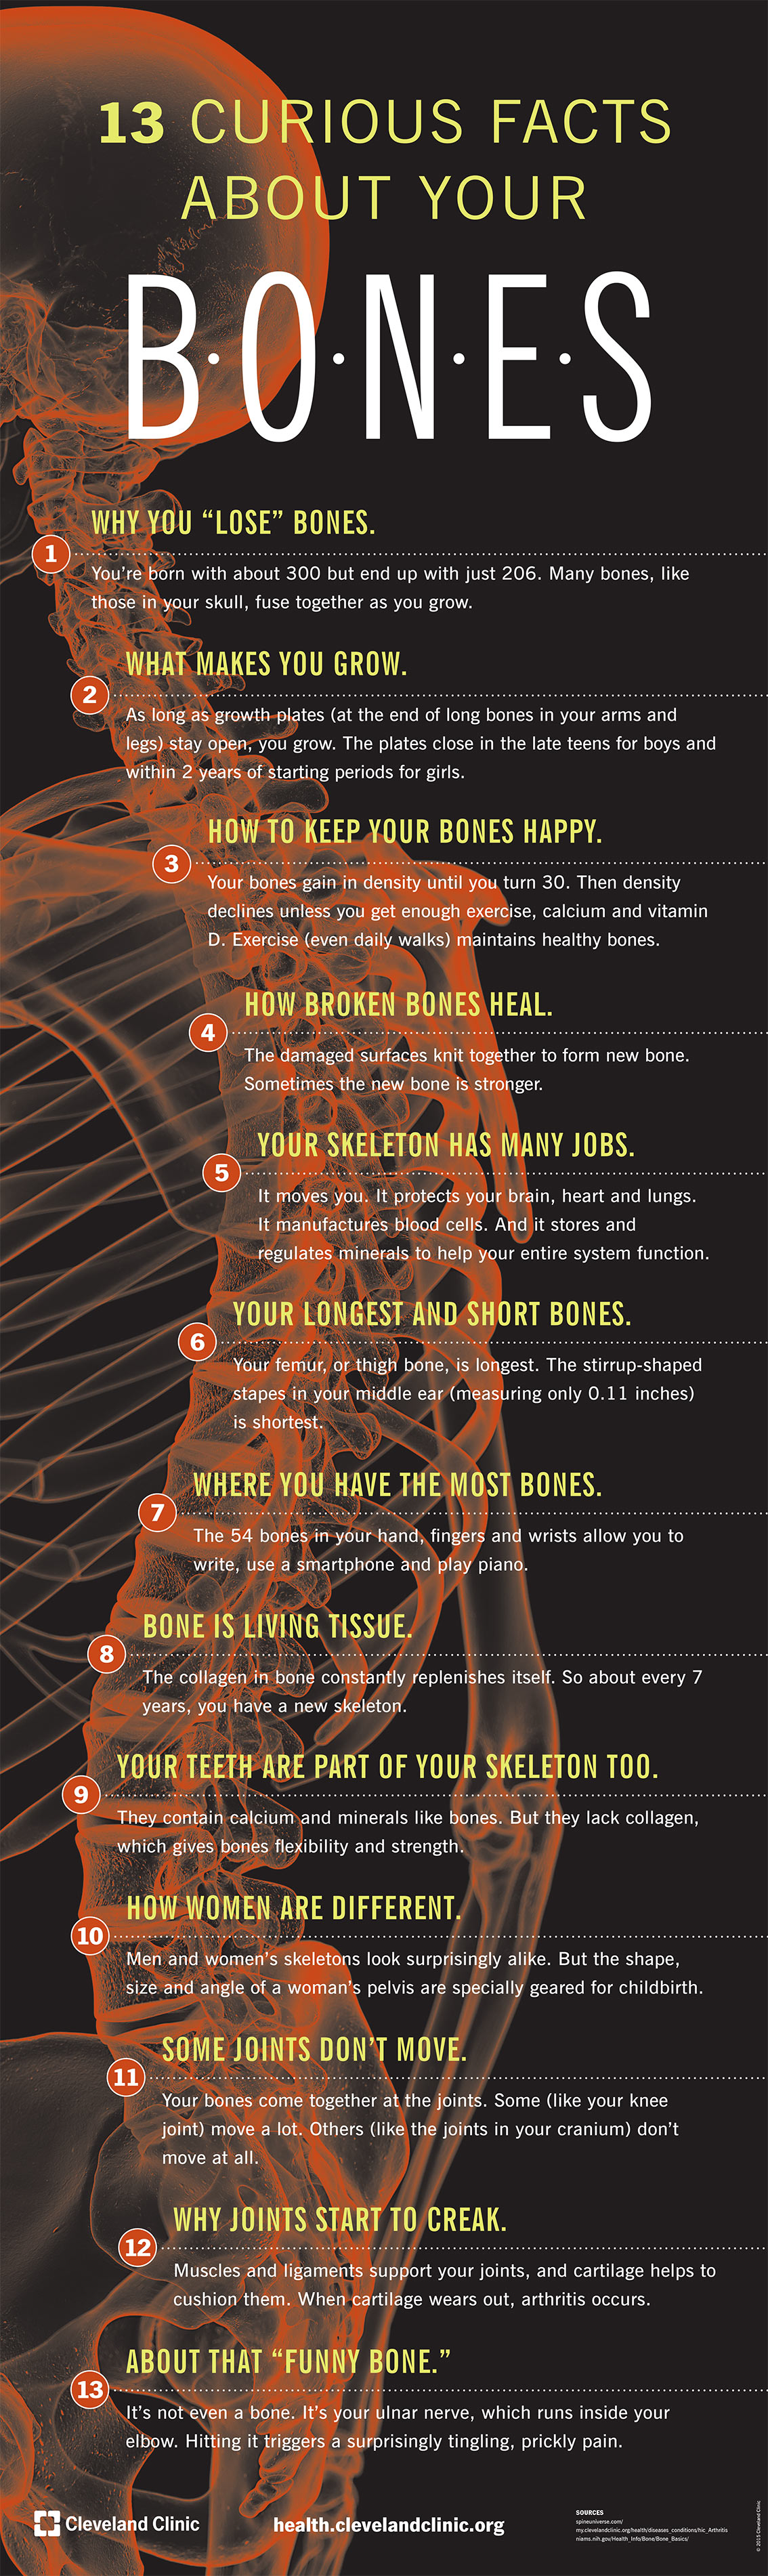 Curious Facts about Your Bones - Health Infographic